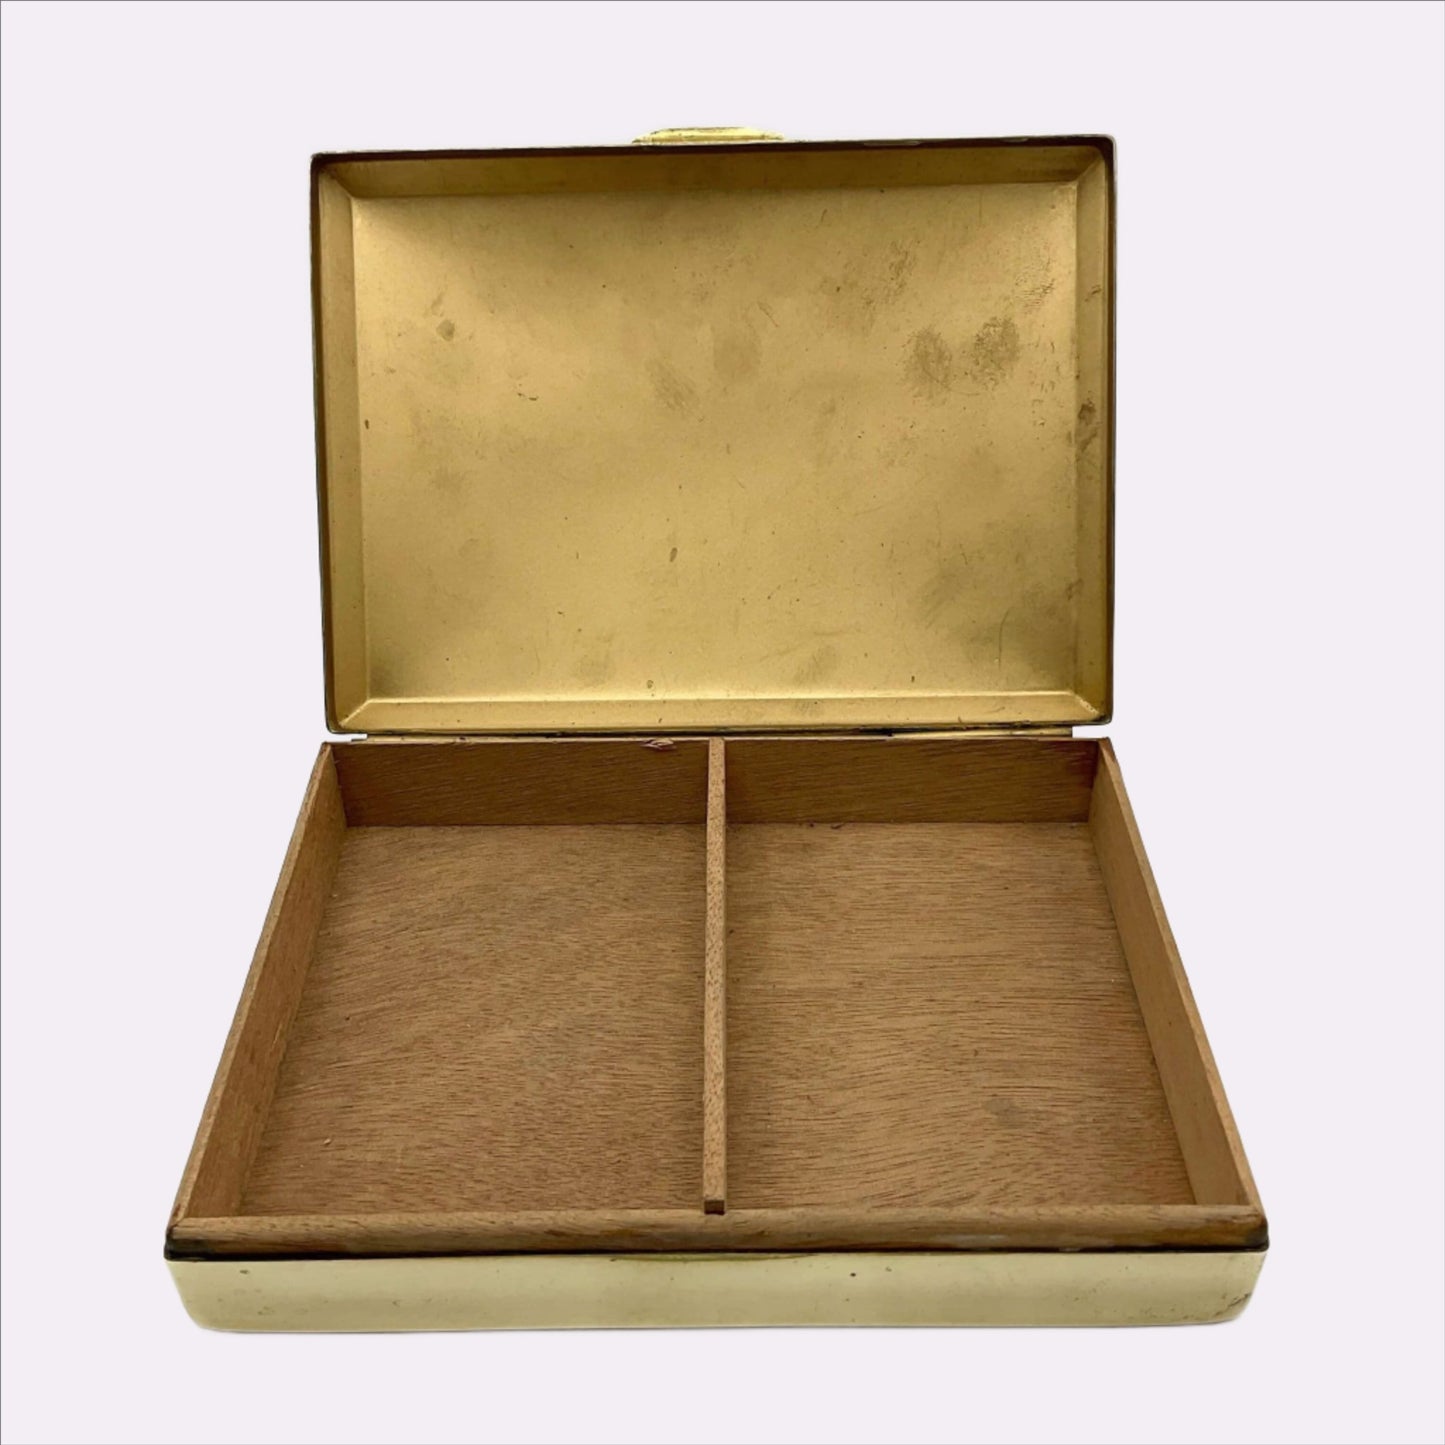 Interior of brass box showing wooden lining